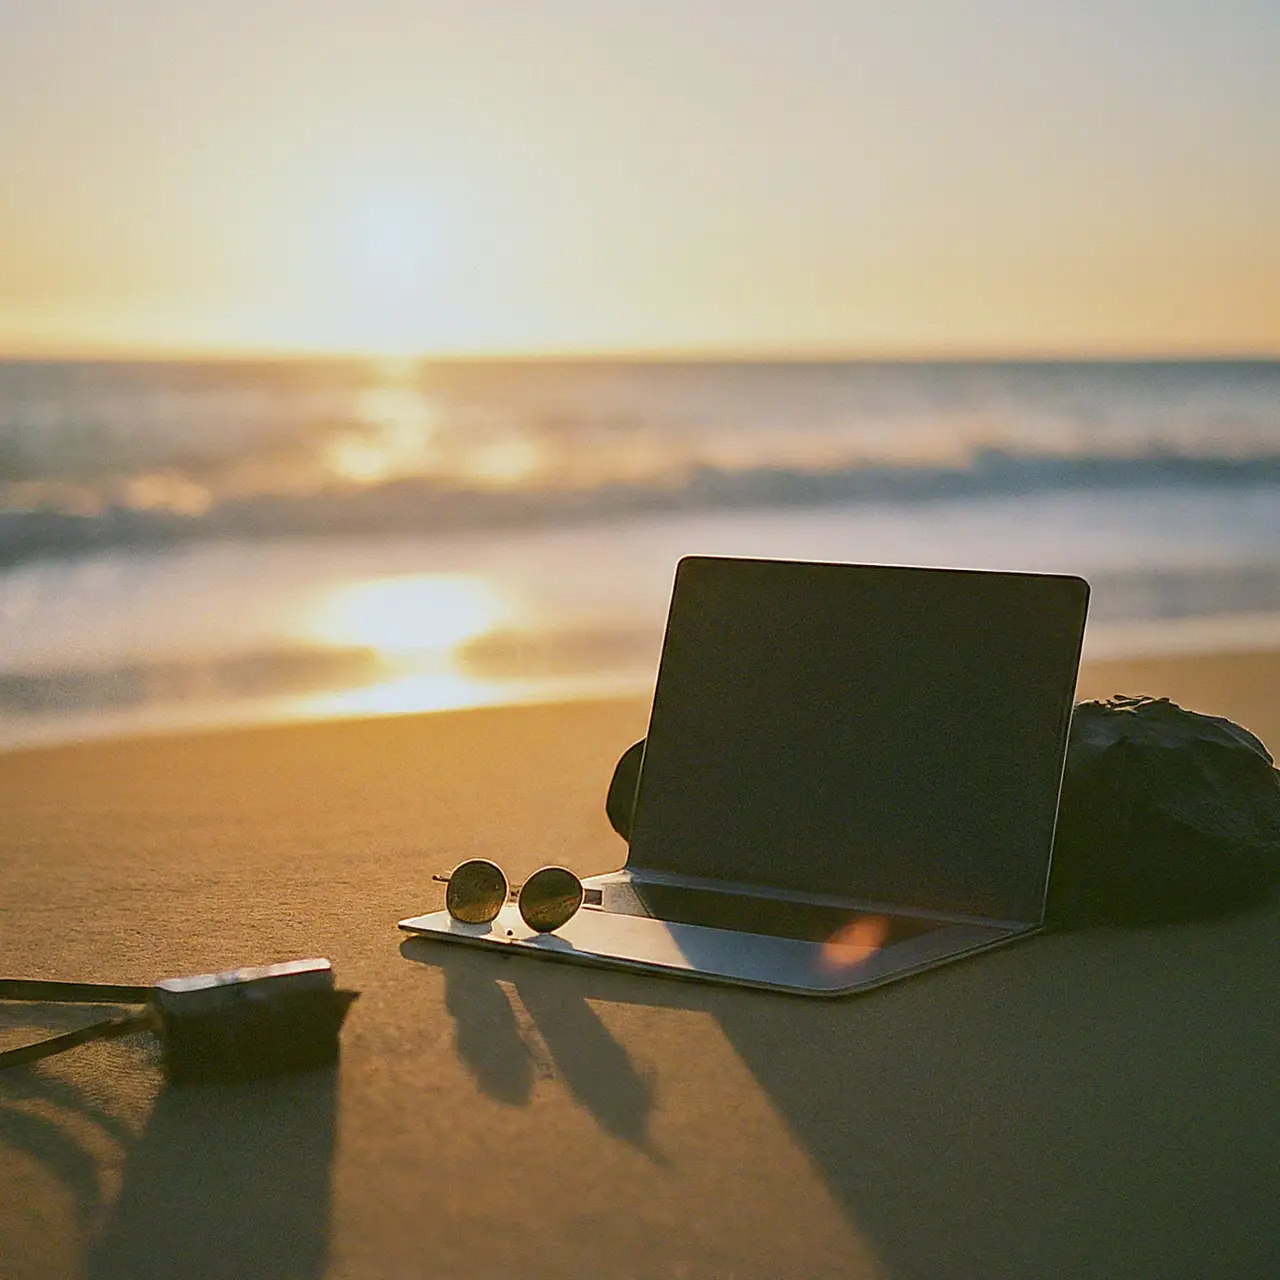 Laptop and travel gear on a beach at sunset. 35mm stock photo